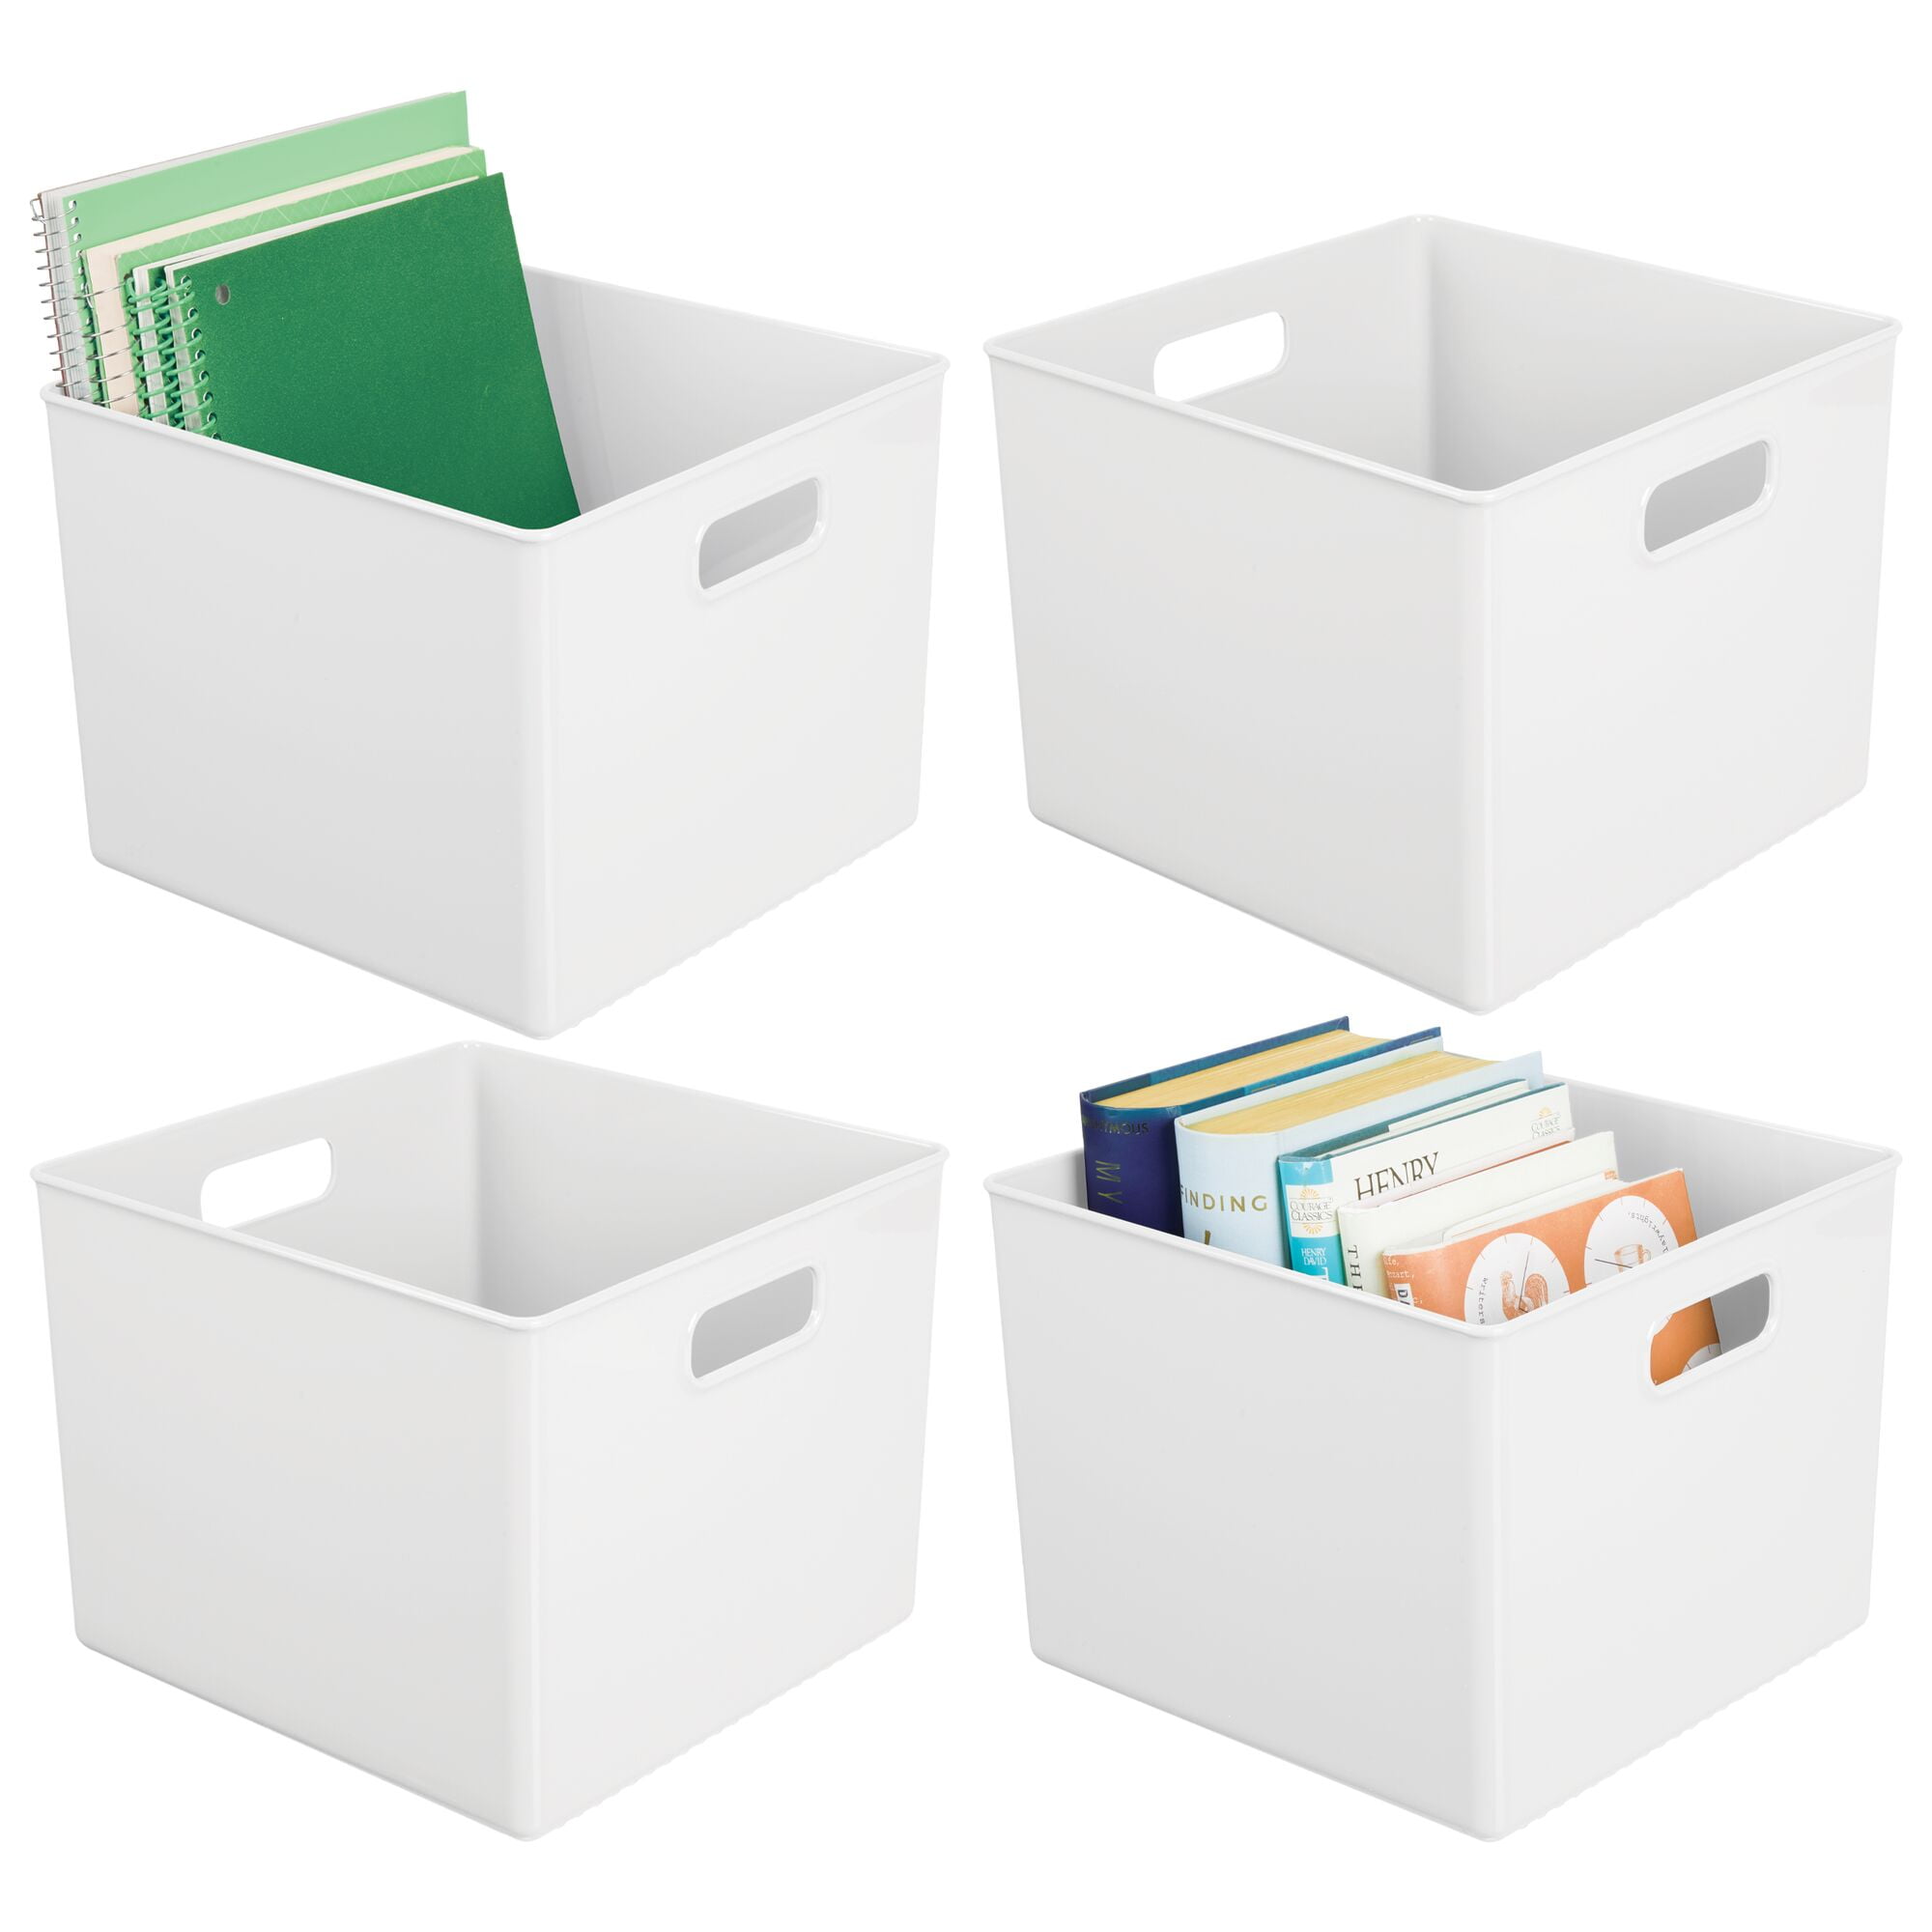  mDesign Deep Plastic Office Storage Bins with Handles for  Organization in Filing Cabinet, Closet, or Desk Drawers, Organizer for  Notes, Pens, Pencils, and Staples - Ligne Collection - 4 Pack 